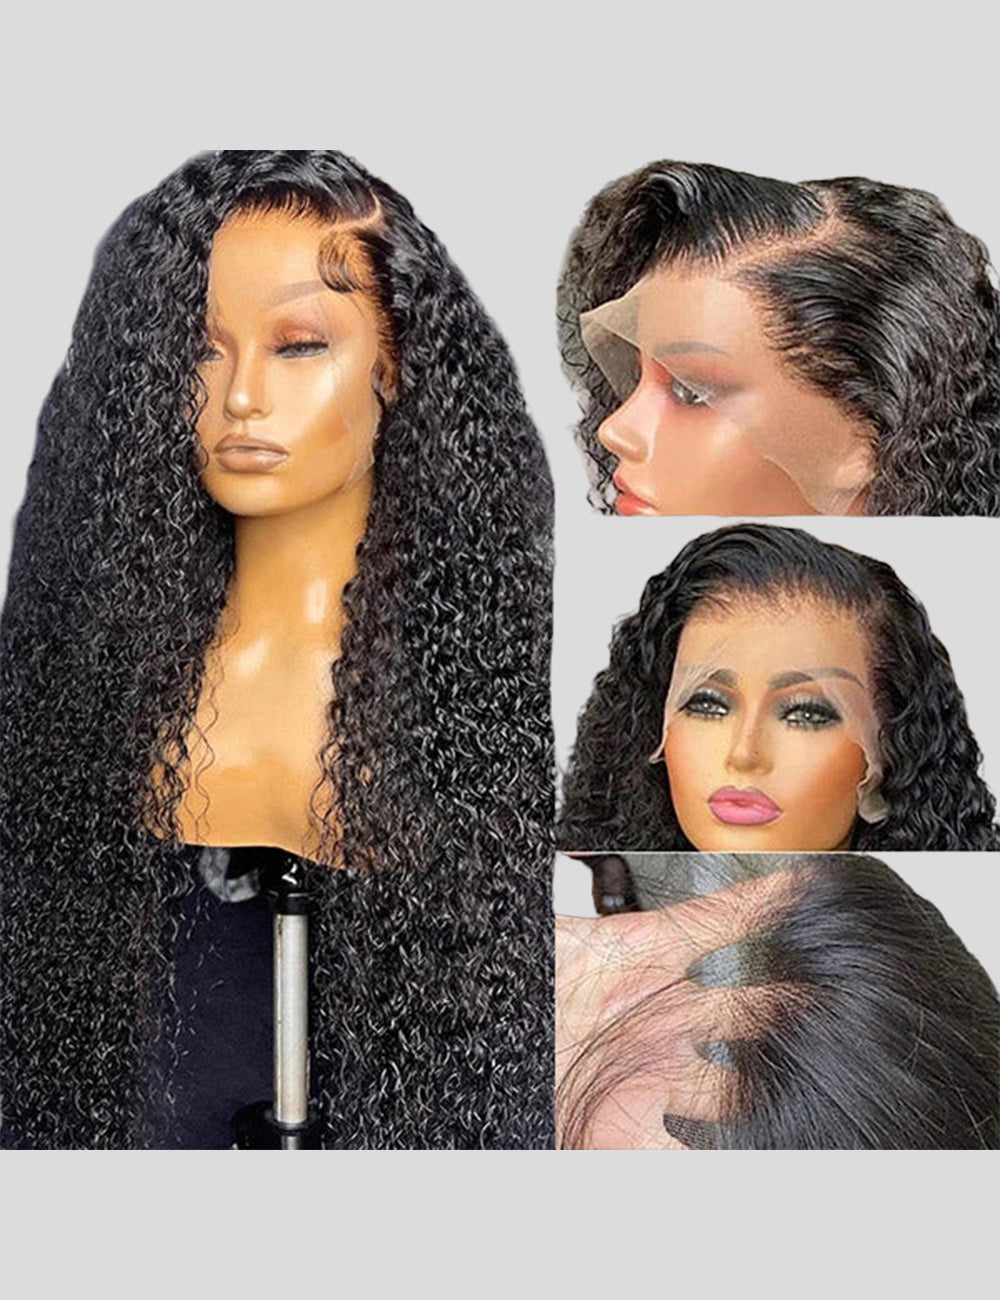 Kinky Curly Lace Front Wigs 13x4 Lace Frontal Wig Curly Hair HD Transparent Human Hair Wigs